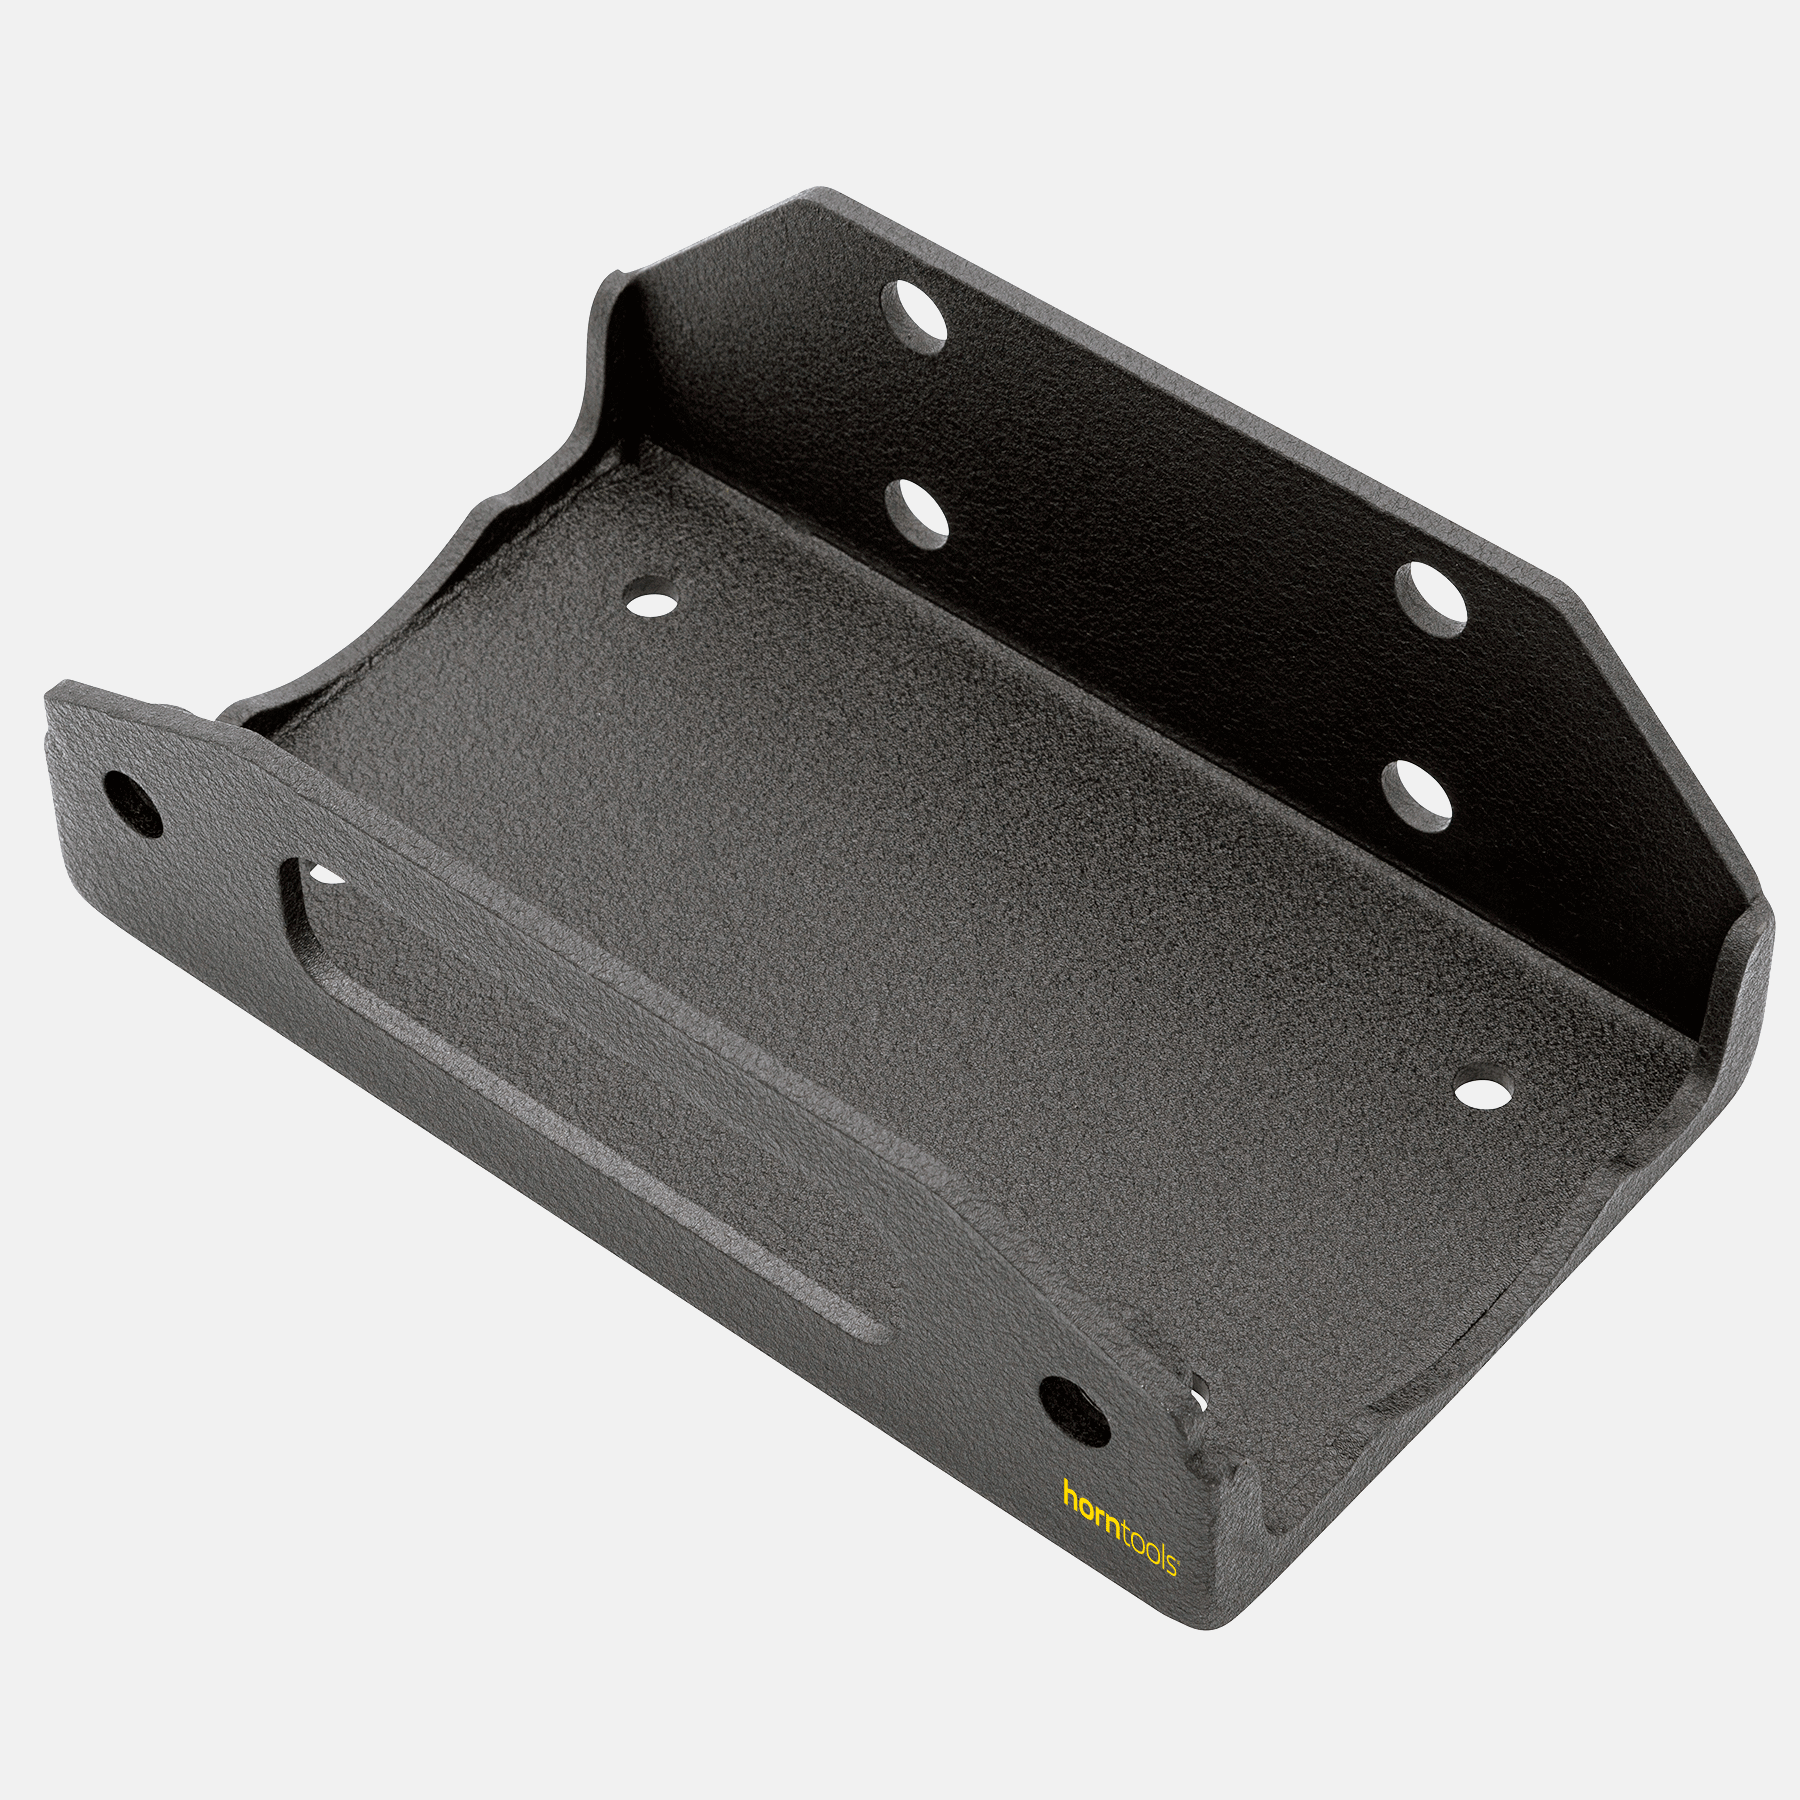 Winch mounting plate Mobil series 4600 for BETWEEN winch carrier